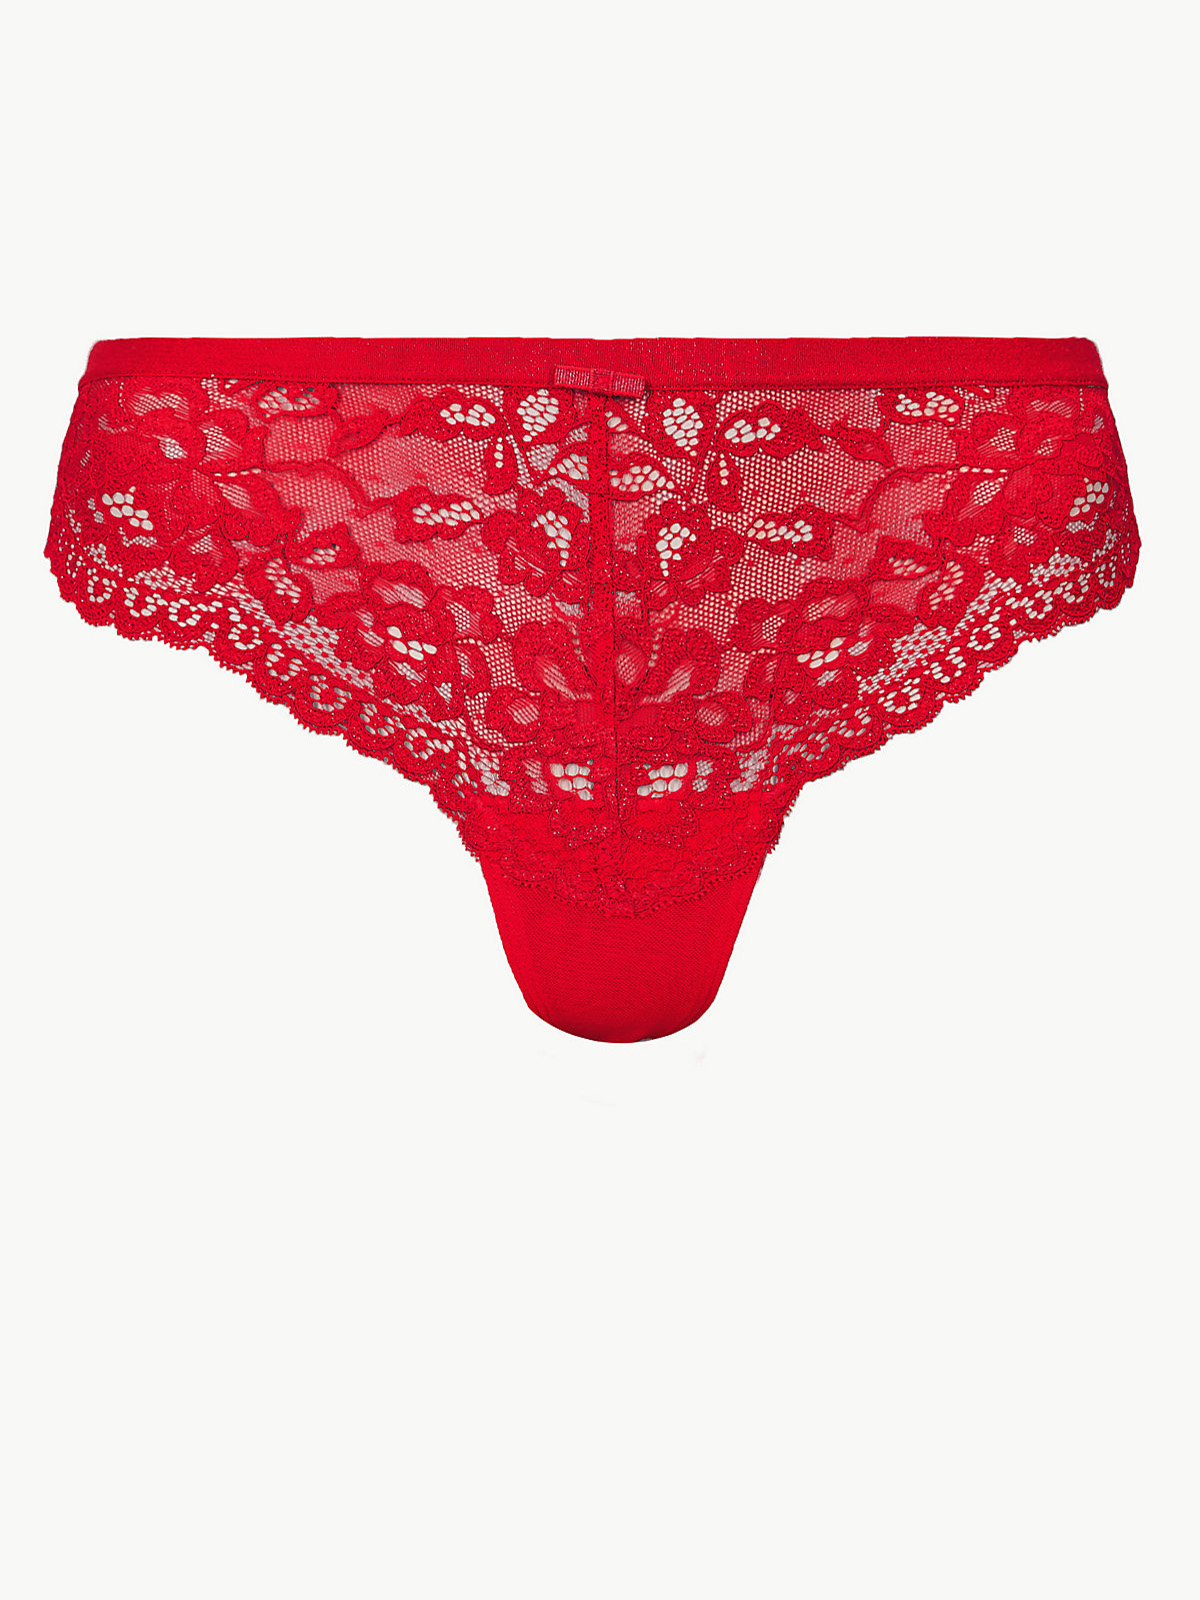 Marks and Spencer - - M&5 RED Floral Lace Thong - Size 6 to 28